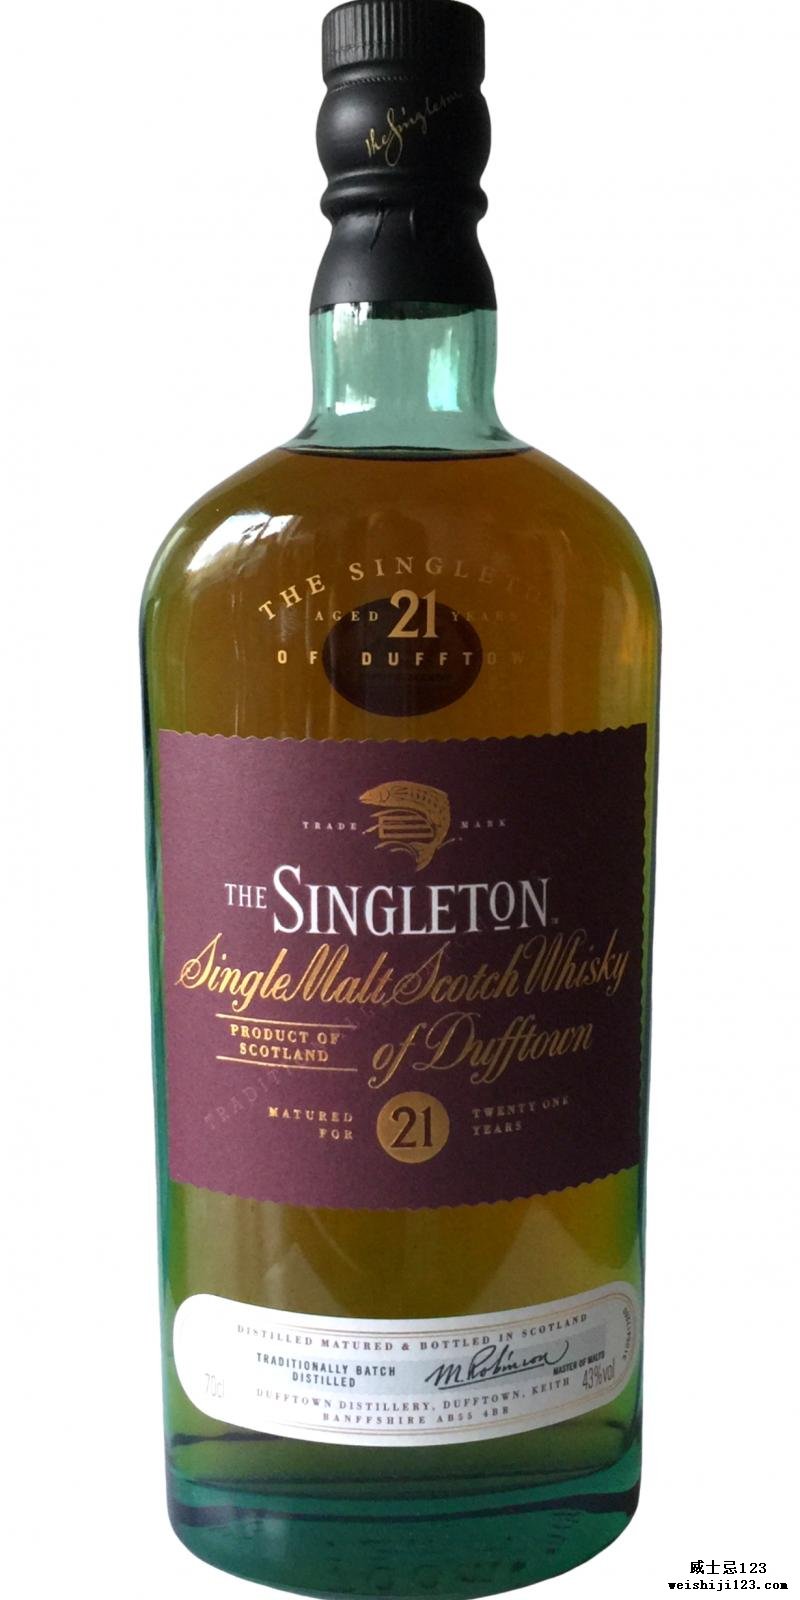 The Singleton of Dufftown 21-year-old